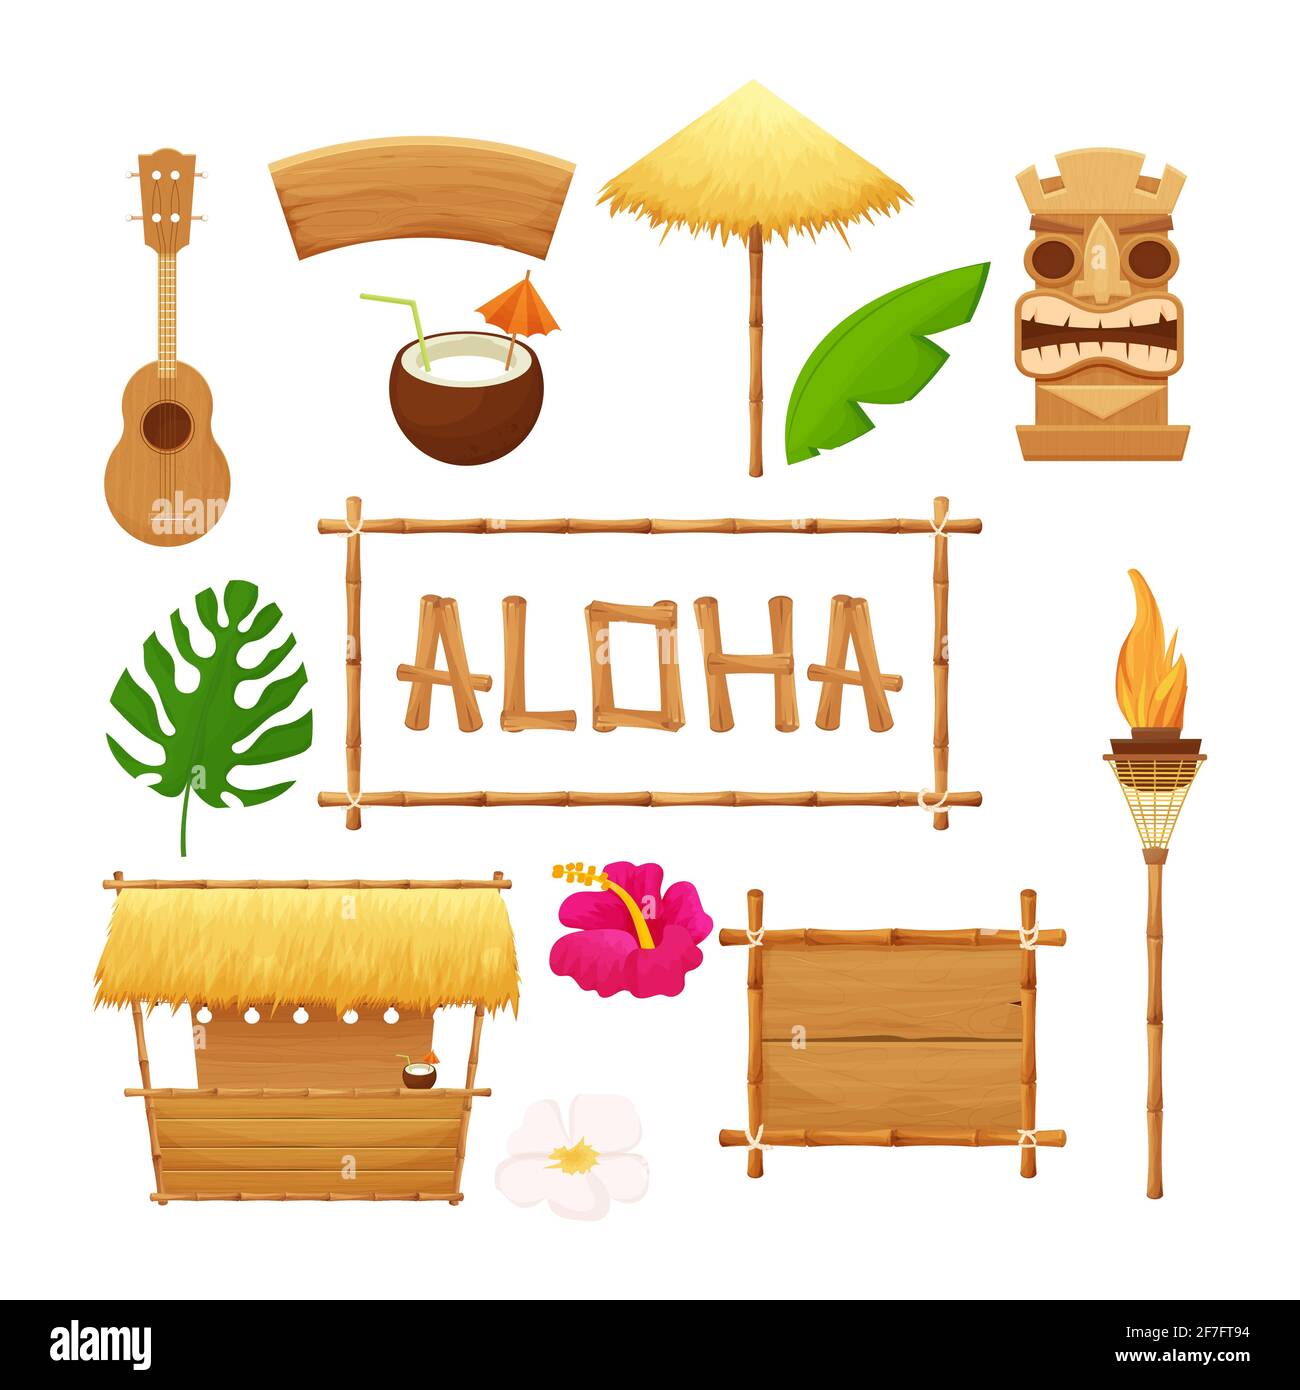 Hawaiian set holiday traditional elements in cartoon style isolated in  white background. Beach bar with straw,